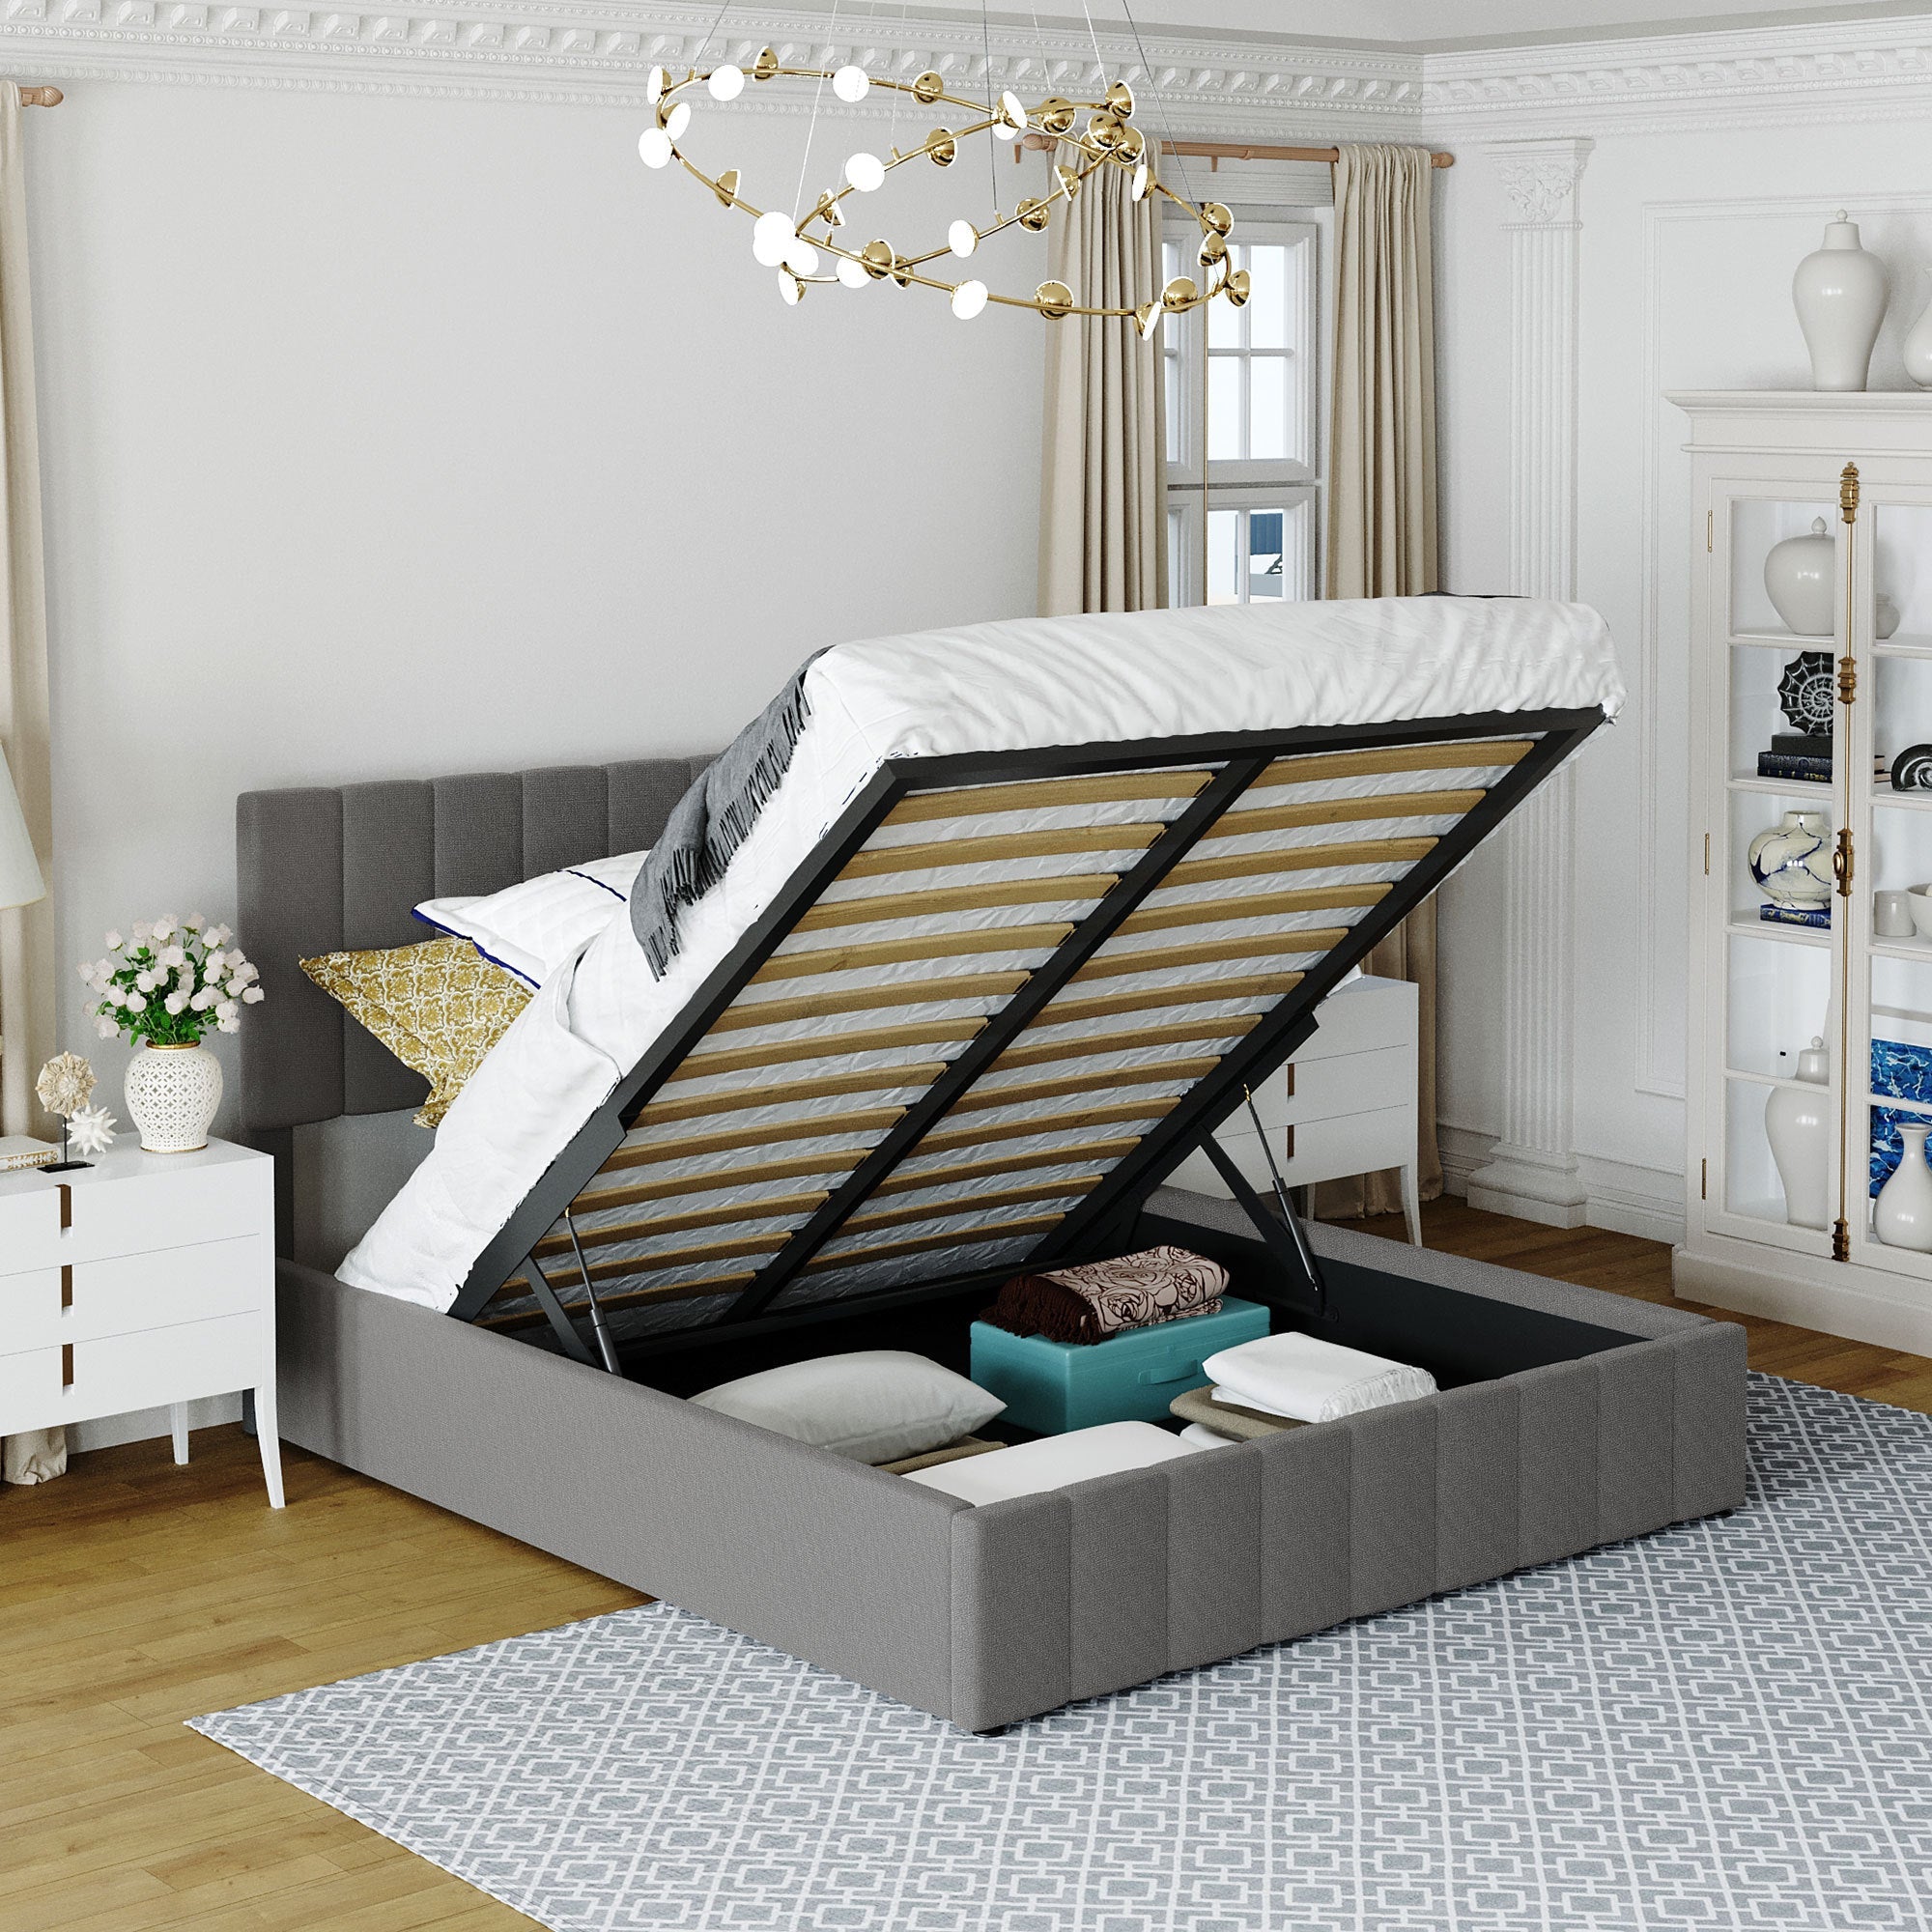 Modern Bedroom Furniture Collection By: Alabama Beds | Furniture Stores Near You